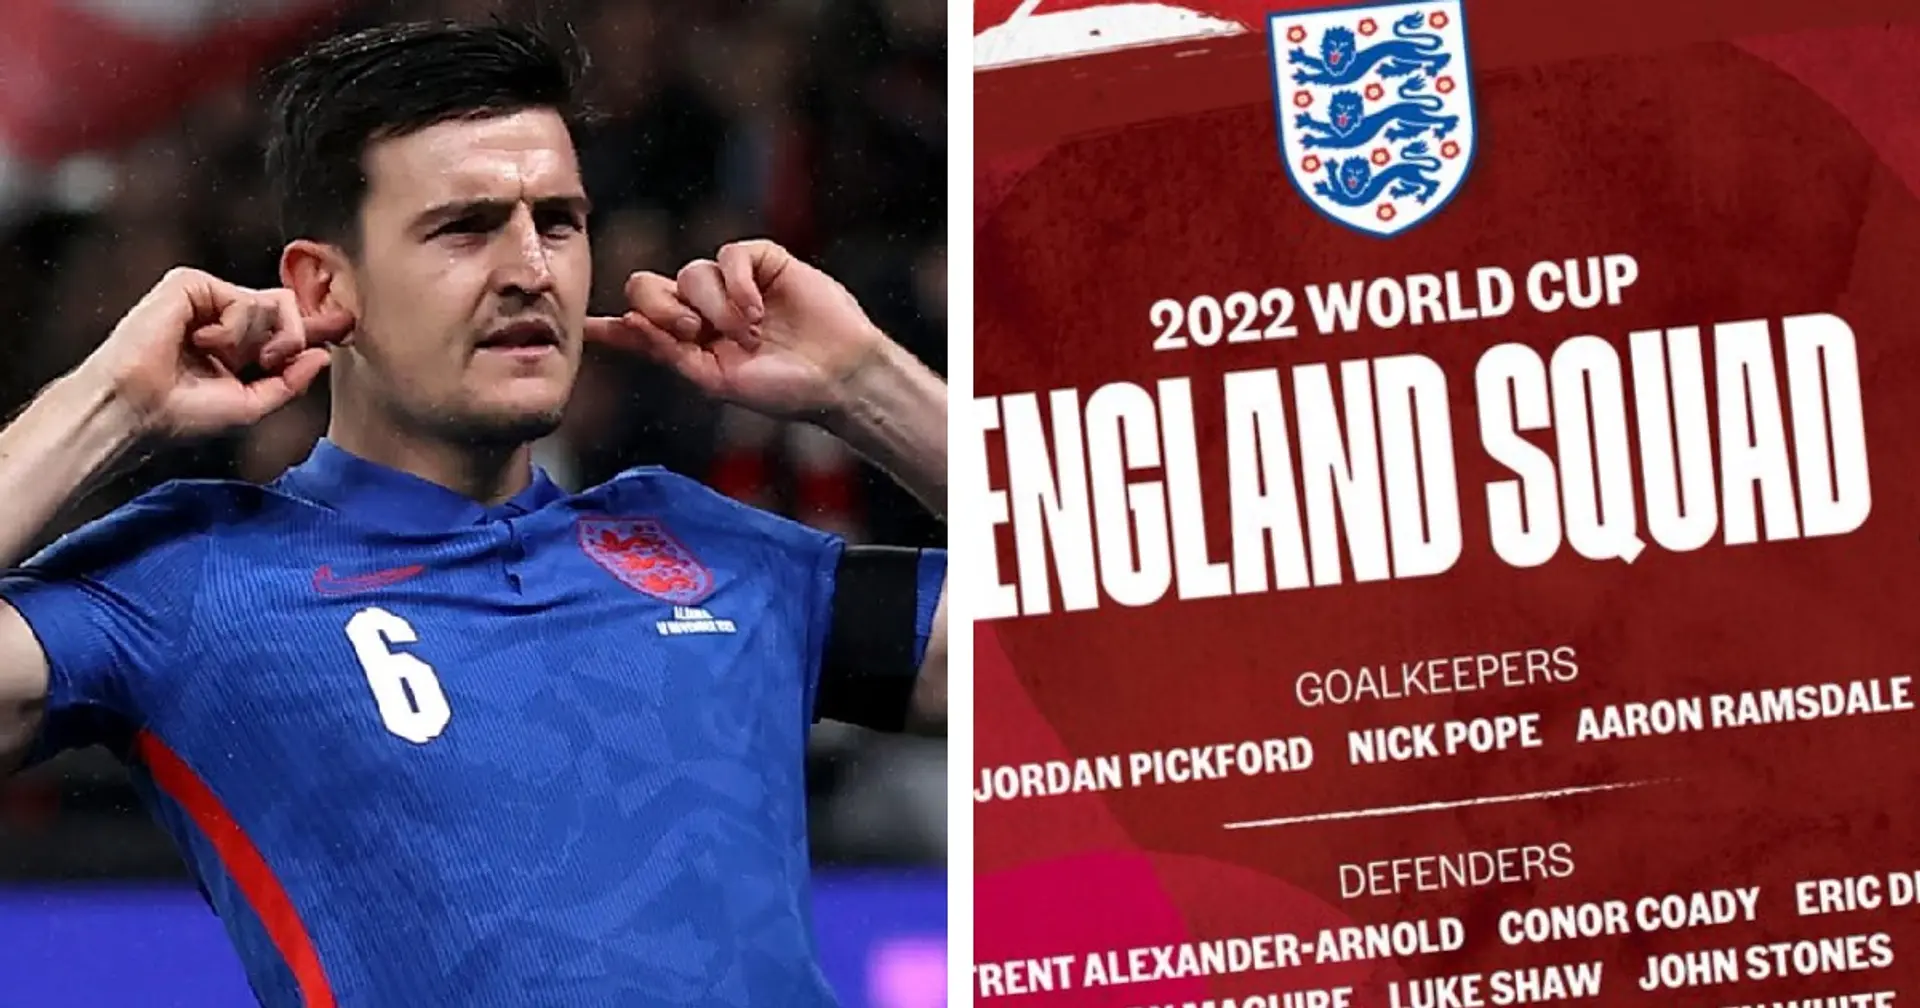 Maguire leads Man United trio to World Cup with England